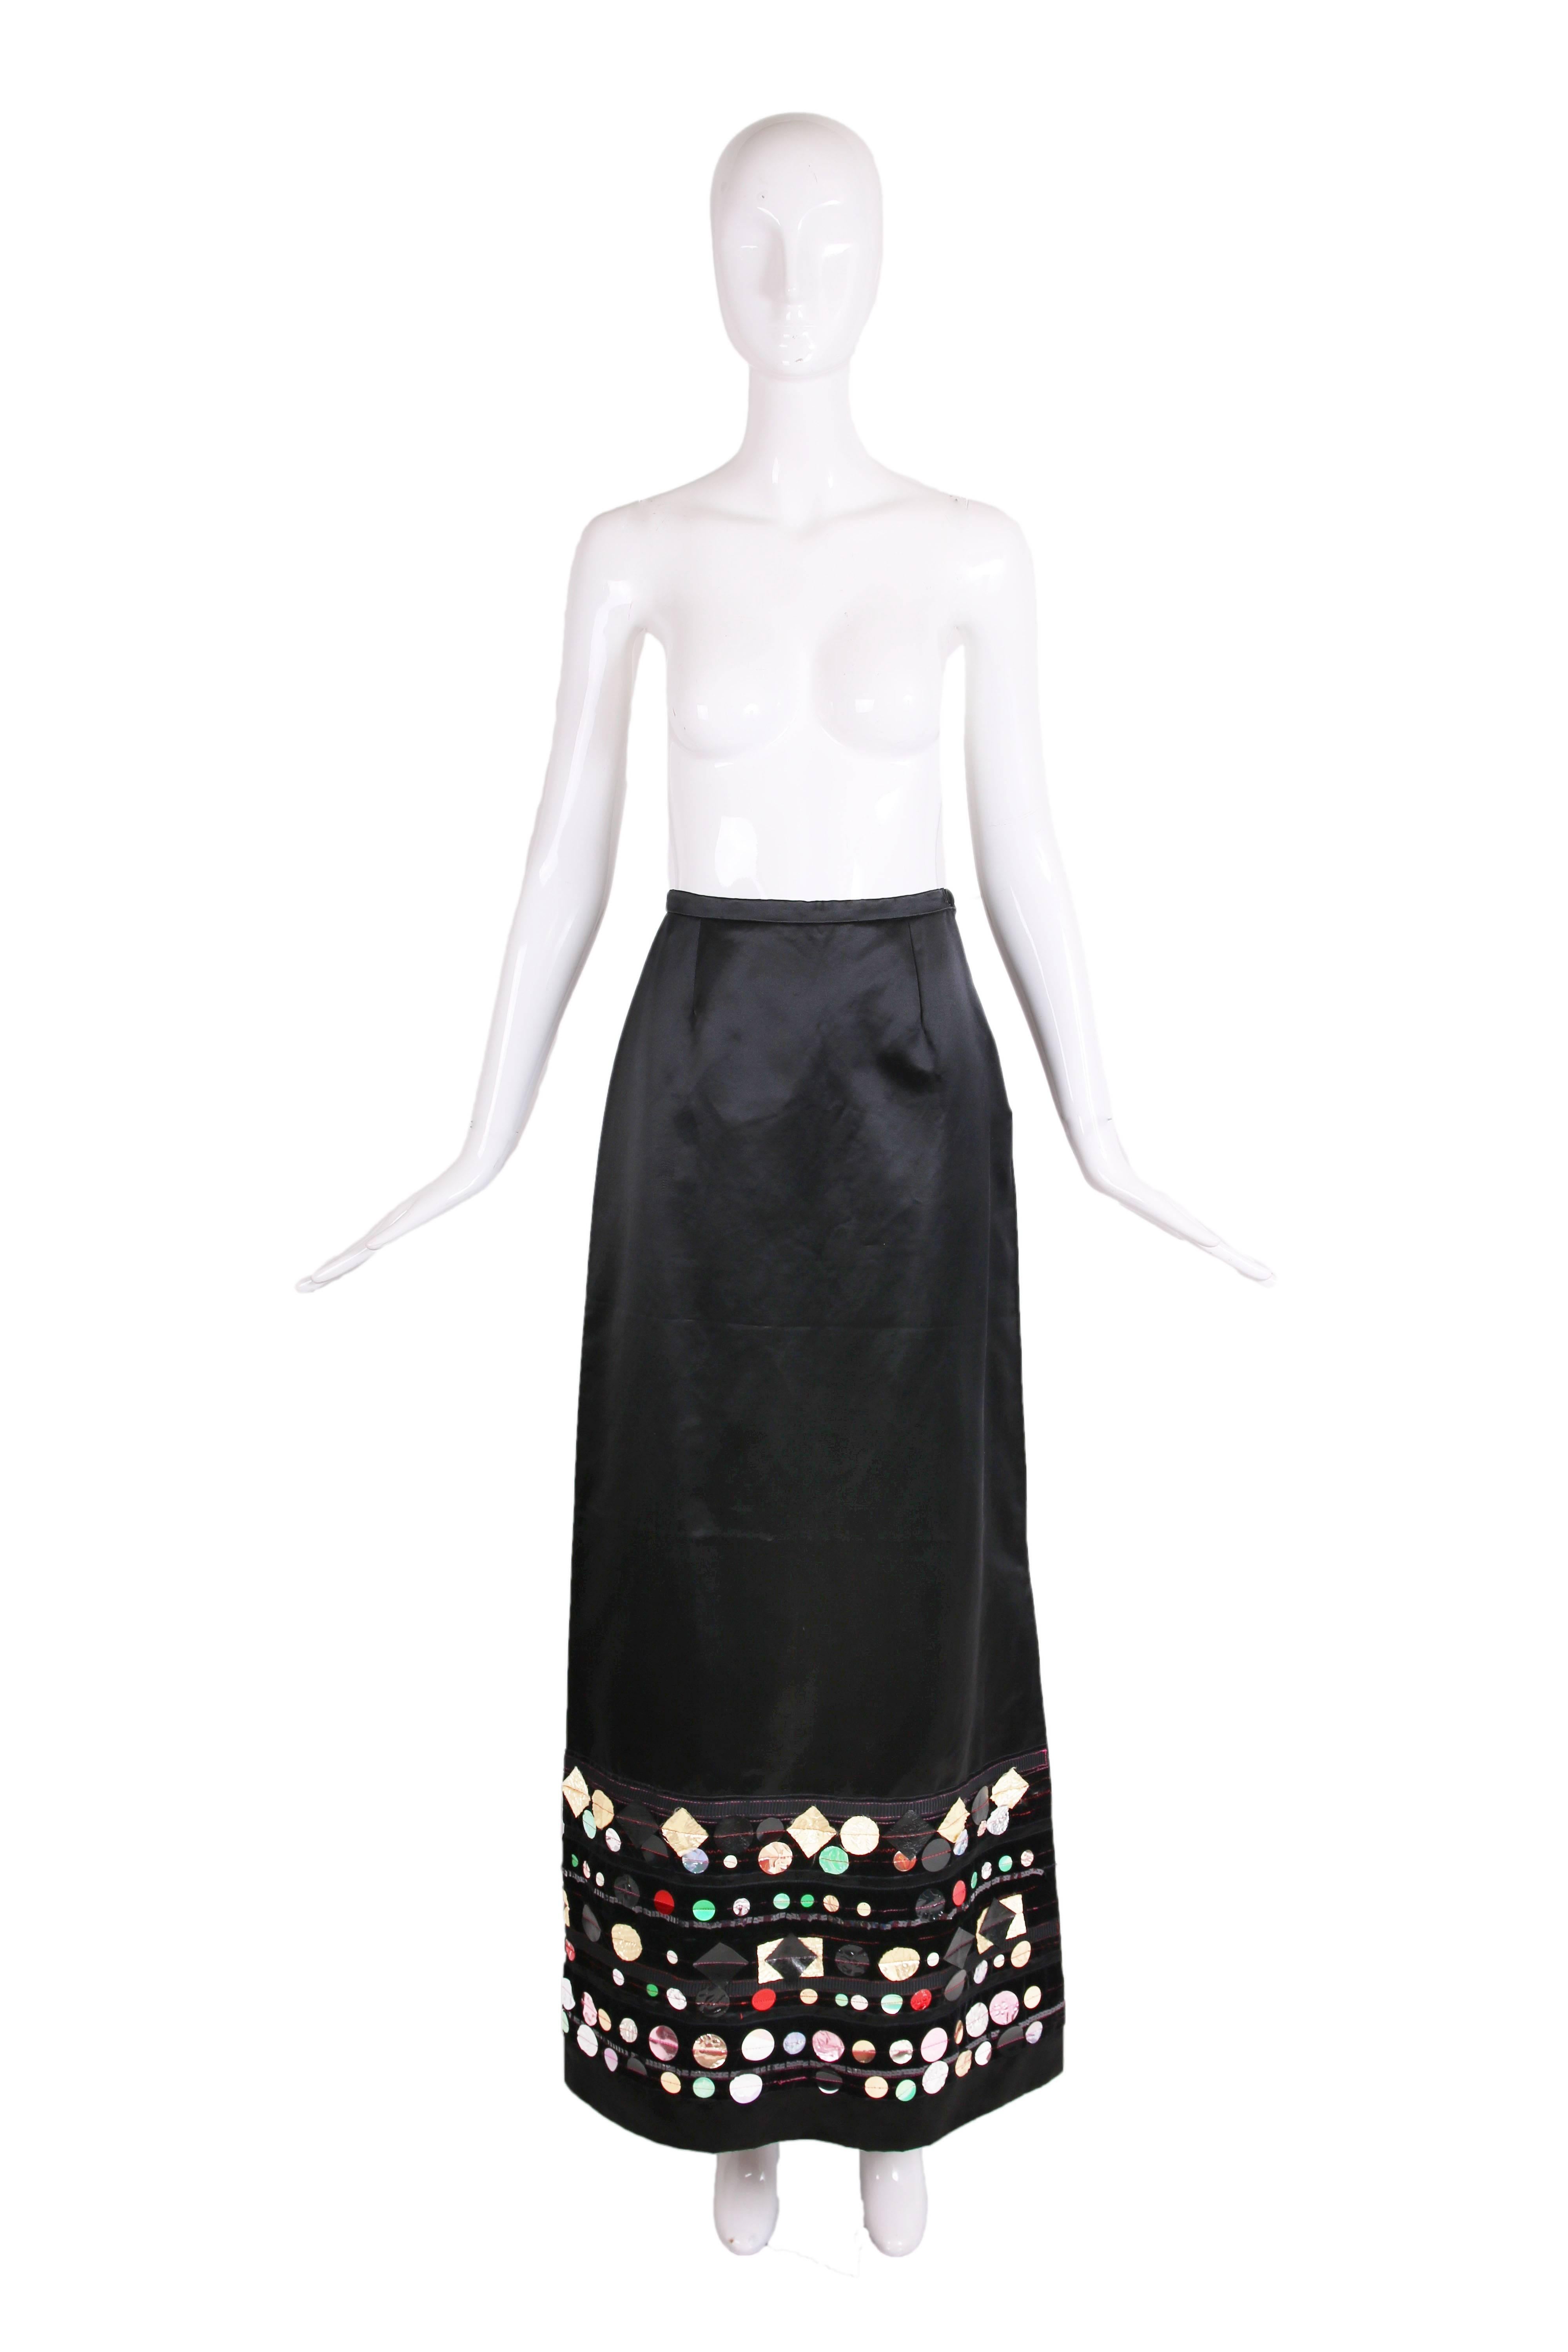 Christian Lacroix Black Satin Cropped Top and Metallic Embellished Maxi Skirt  1